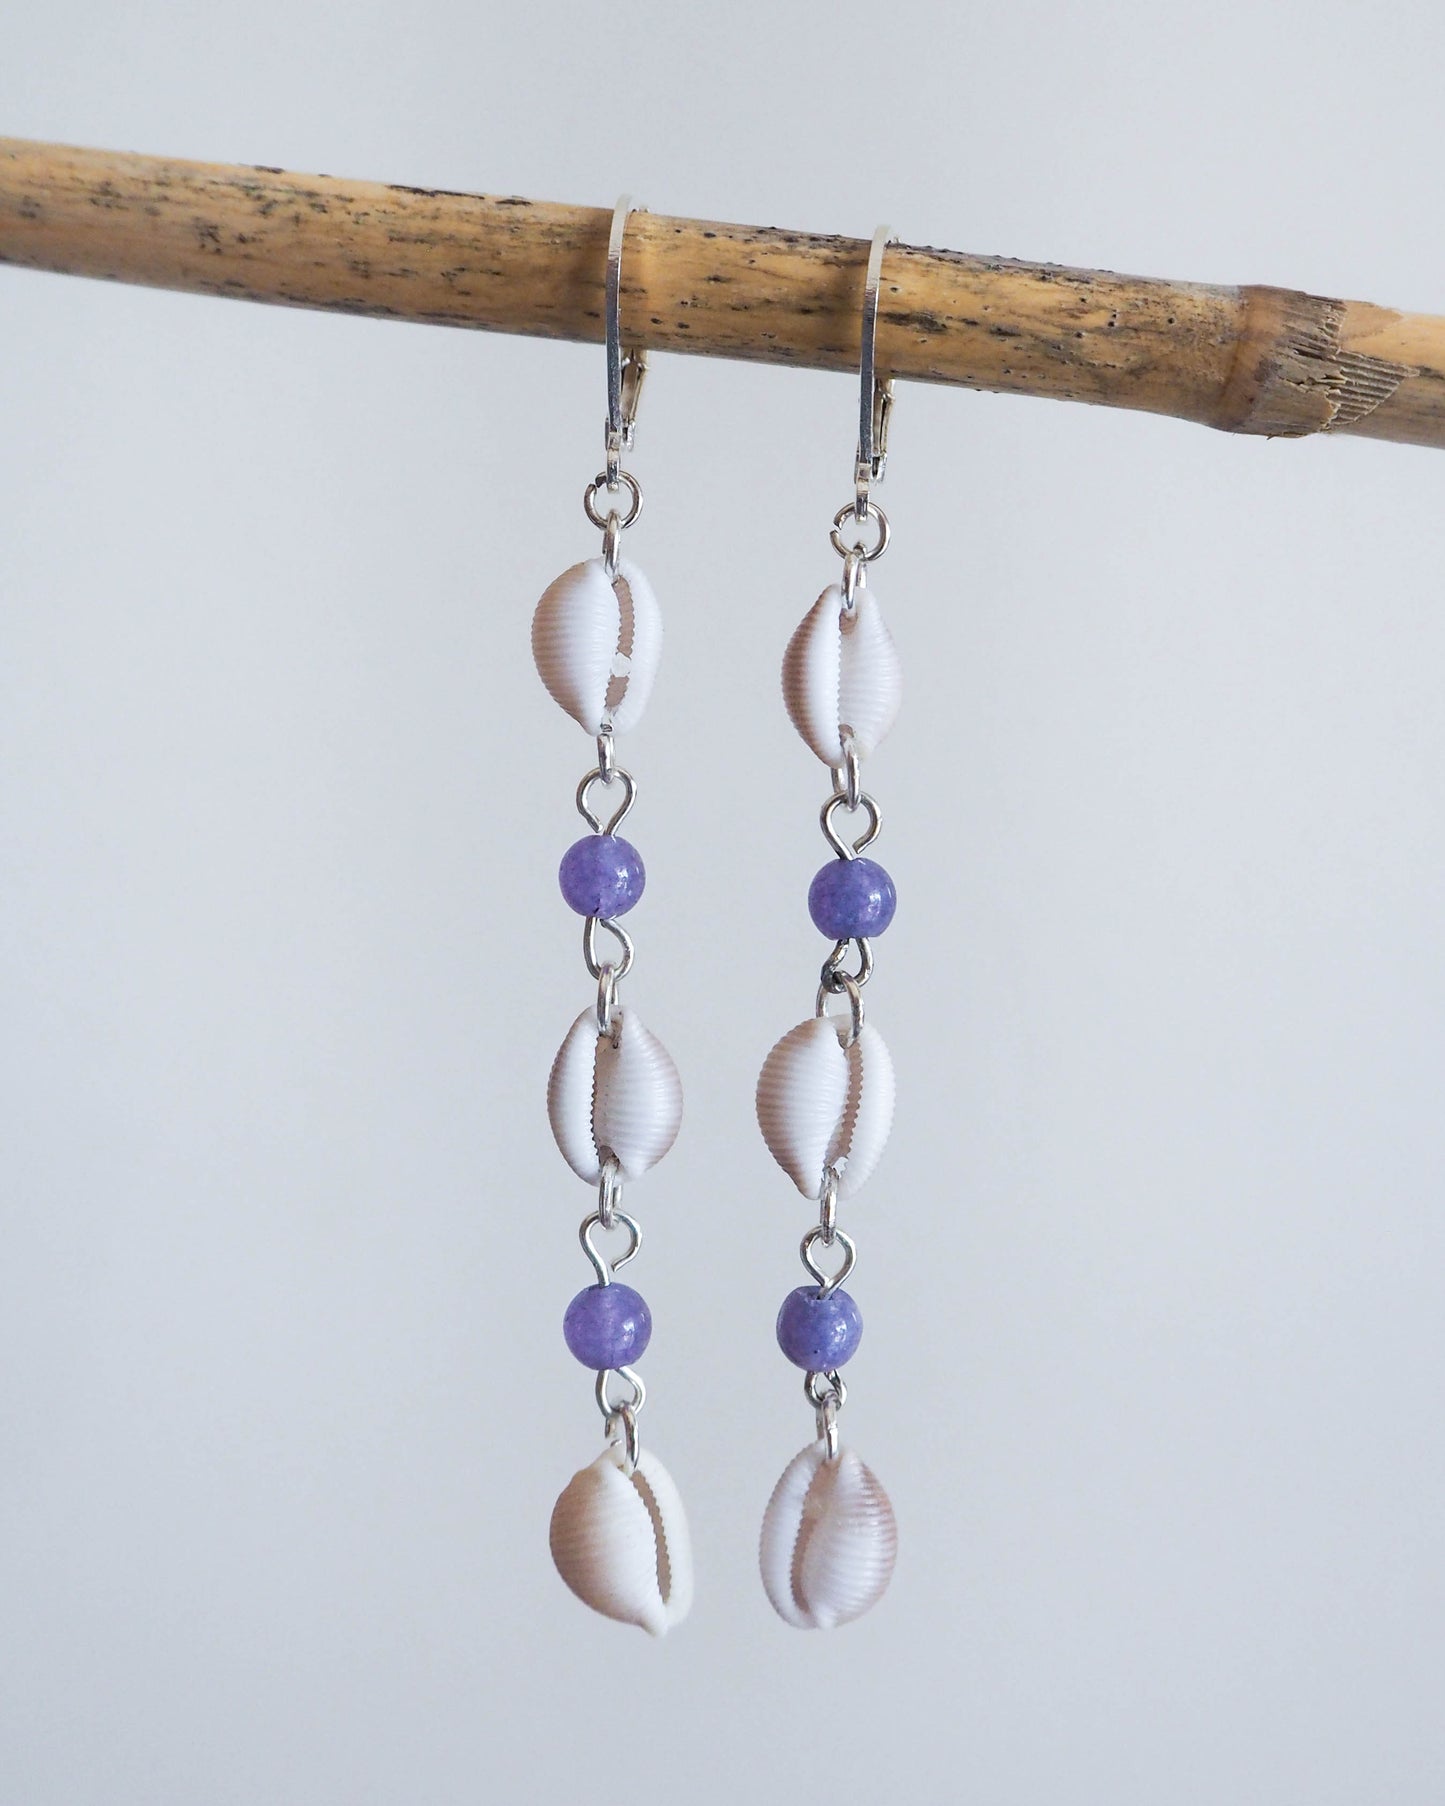 Close-up of European Cowrie Shell Earrings with Amethyst Bead Accents